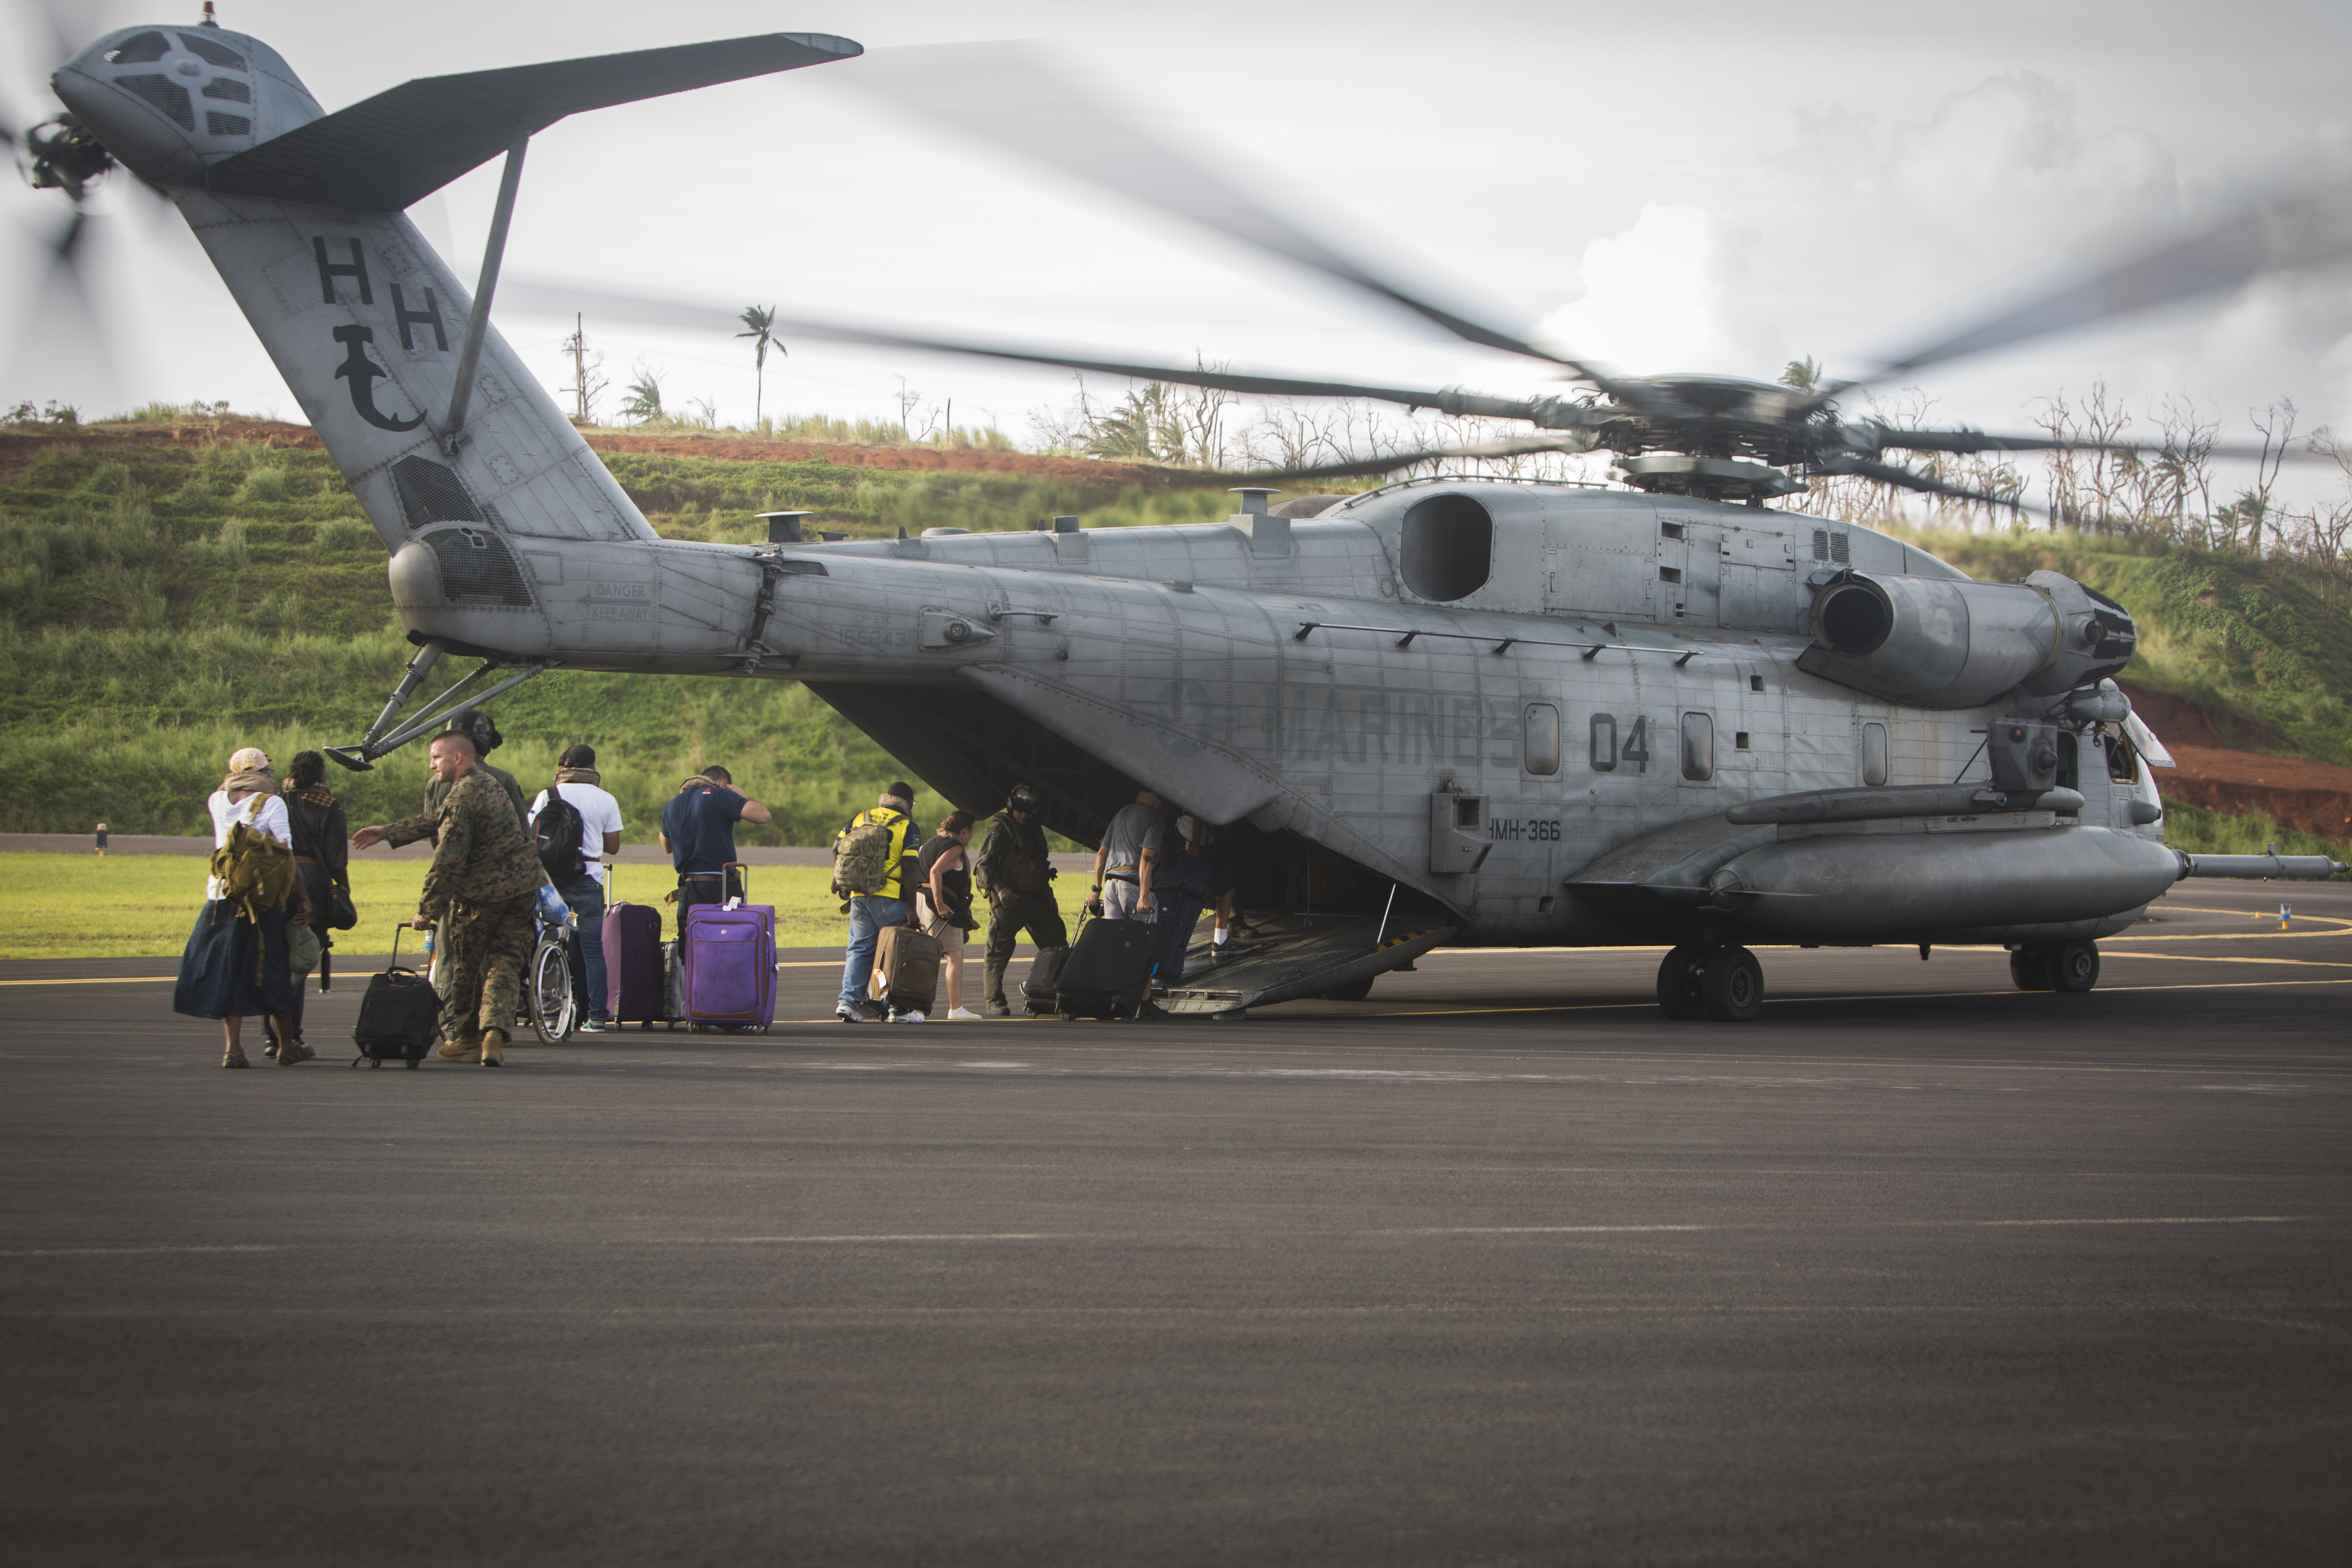 US citizens board a US Marine Corps CH-53E Super Stallion helicopter assigned to Joint Task Force - Leeward Islands (JTF-LI) at Douglas-Charles Airport in Dominica on Sept. 24, 2017. US Marine Corps Photo